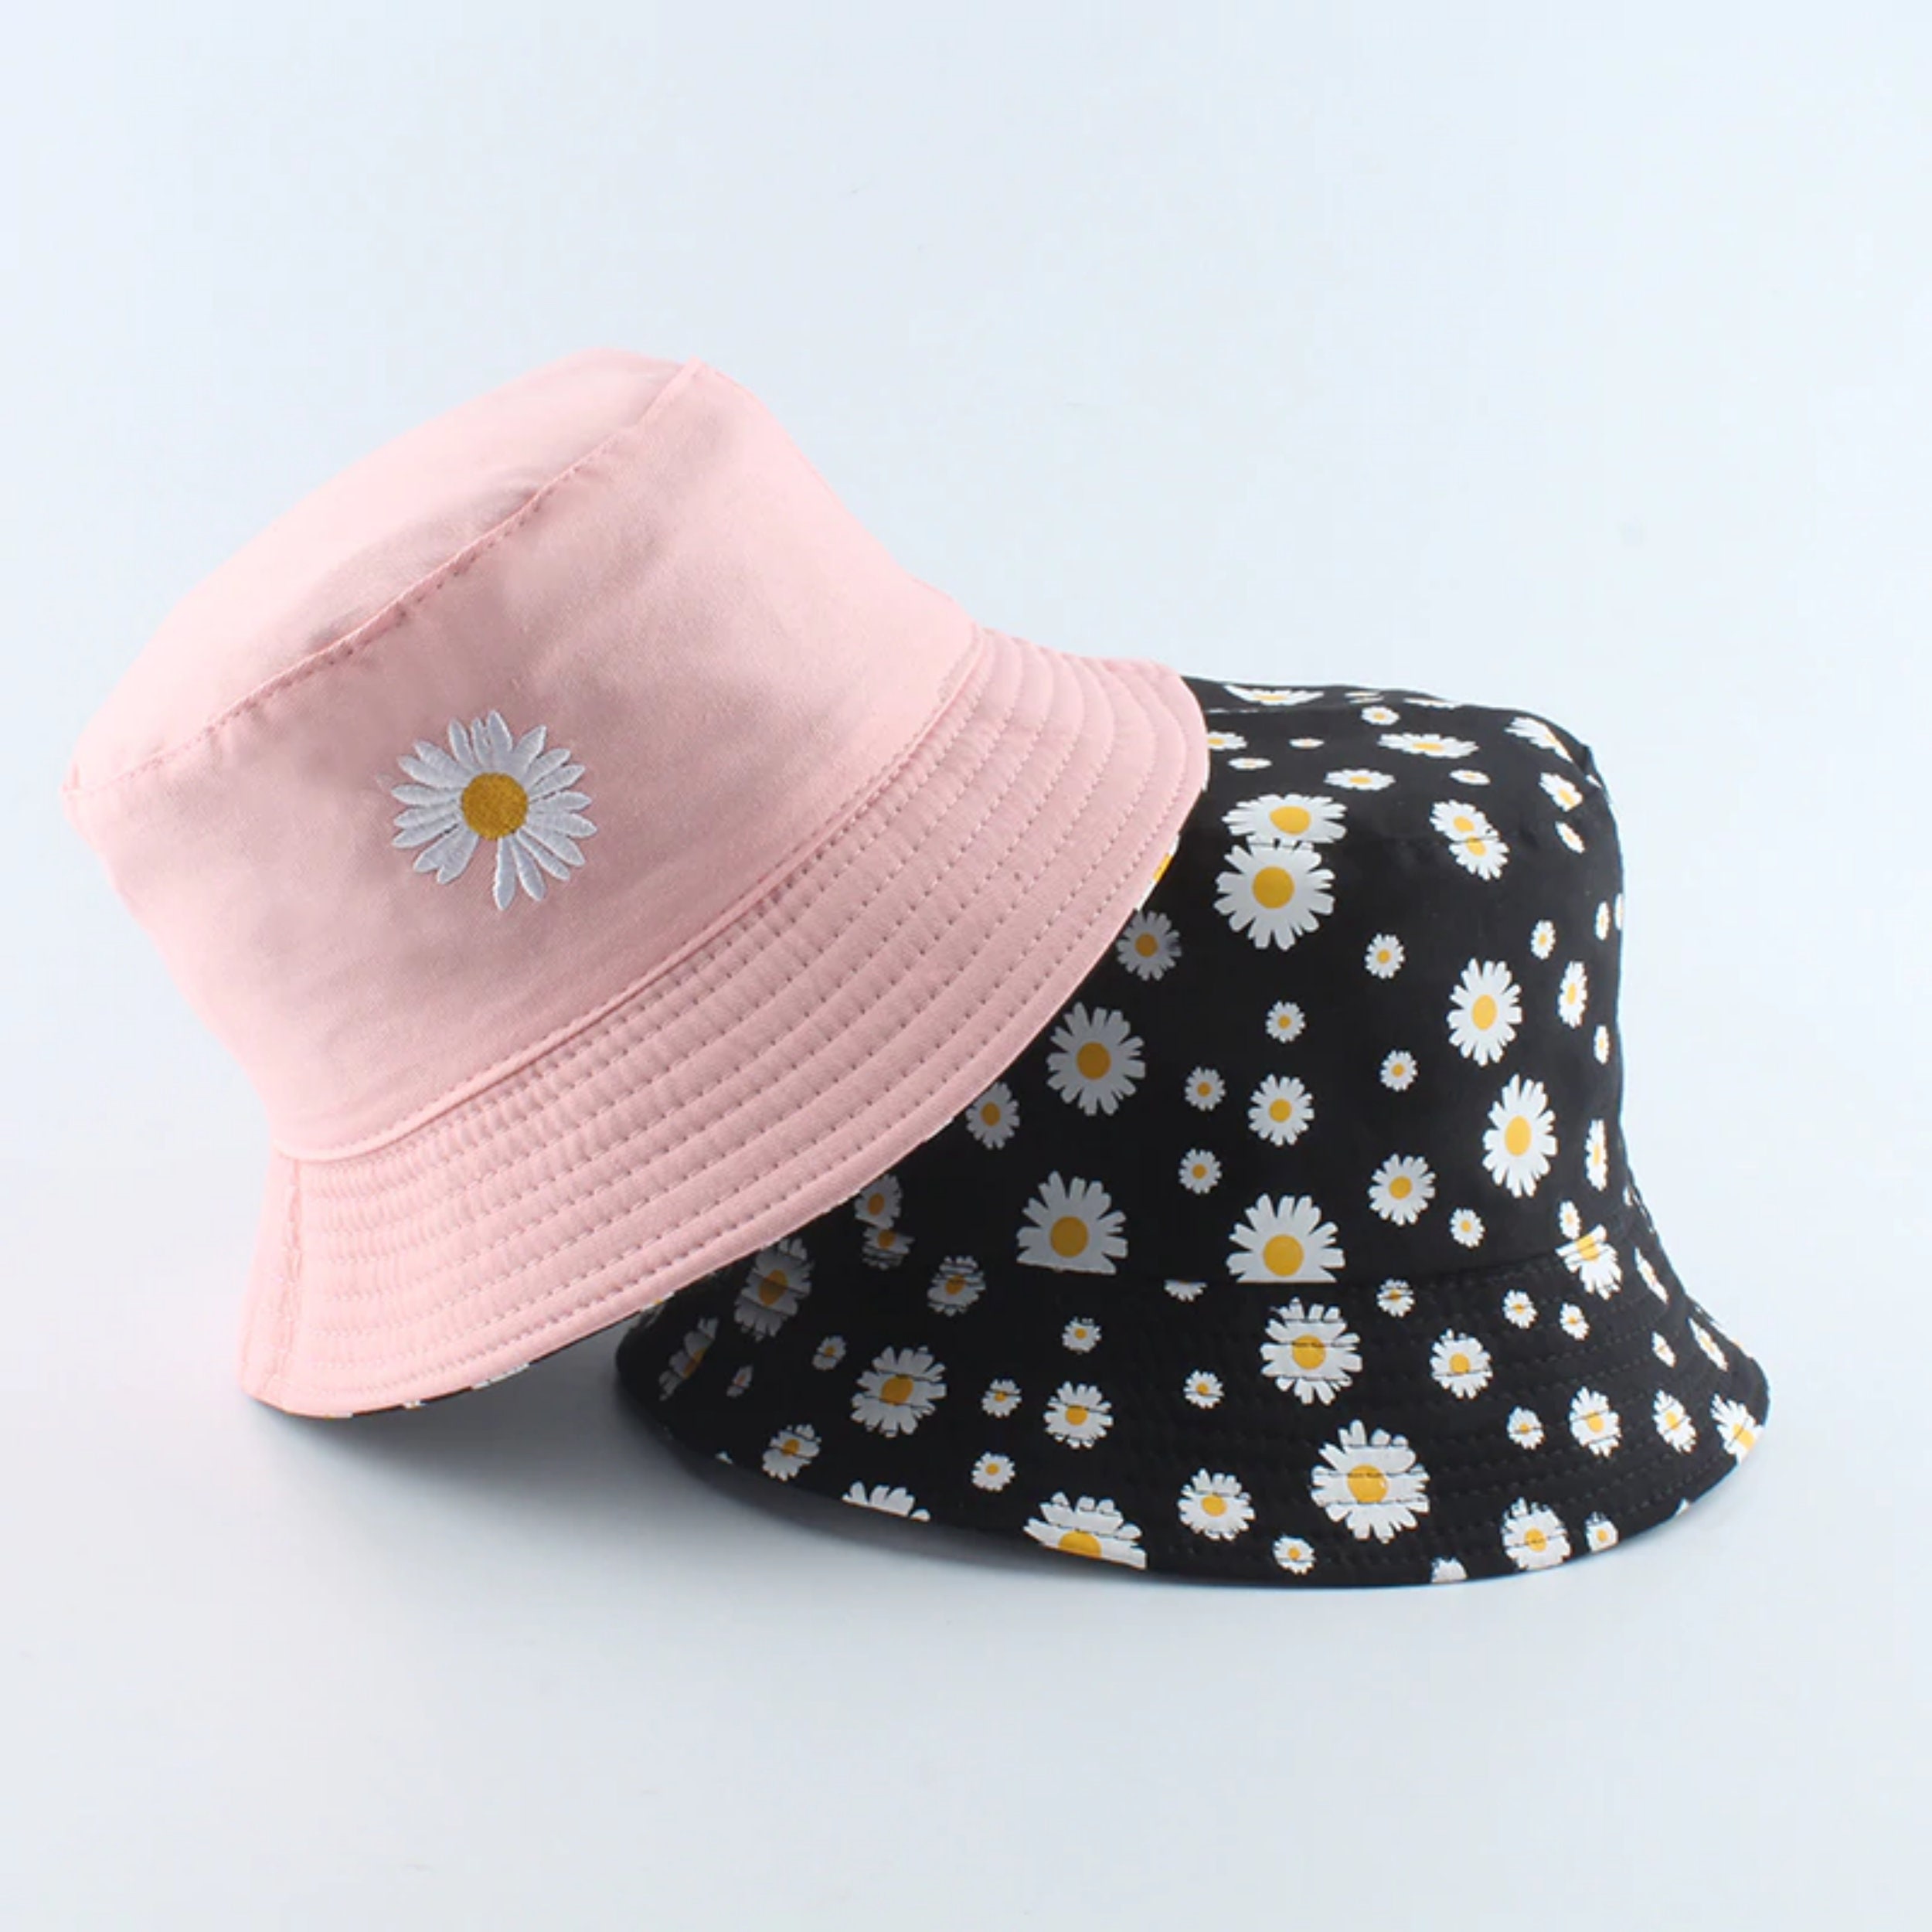 Daisy Bucket Hat Reversible Mother's Day Gift Floral - Etsy